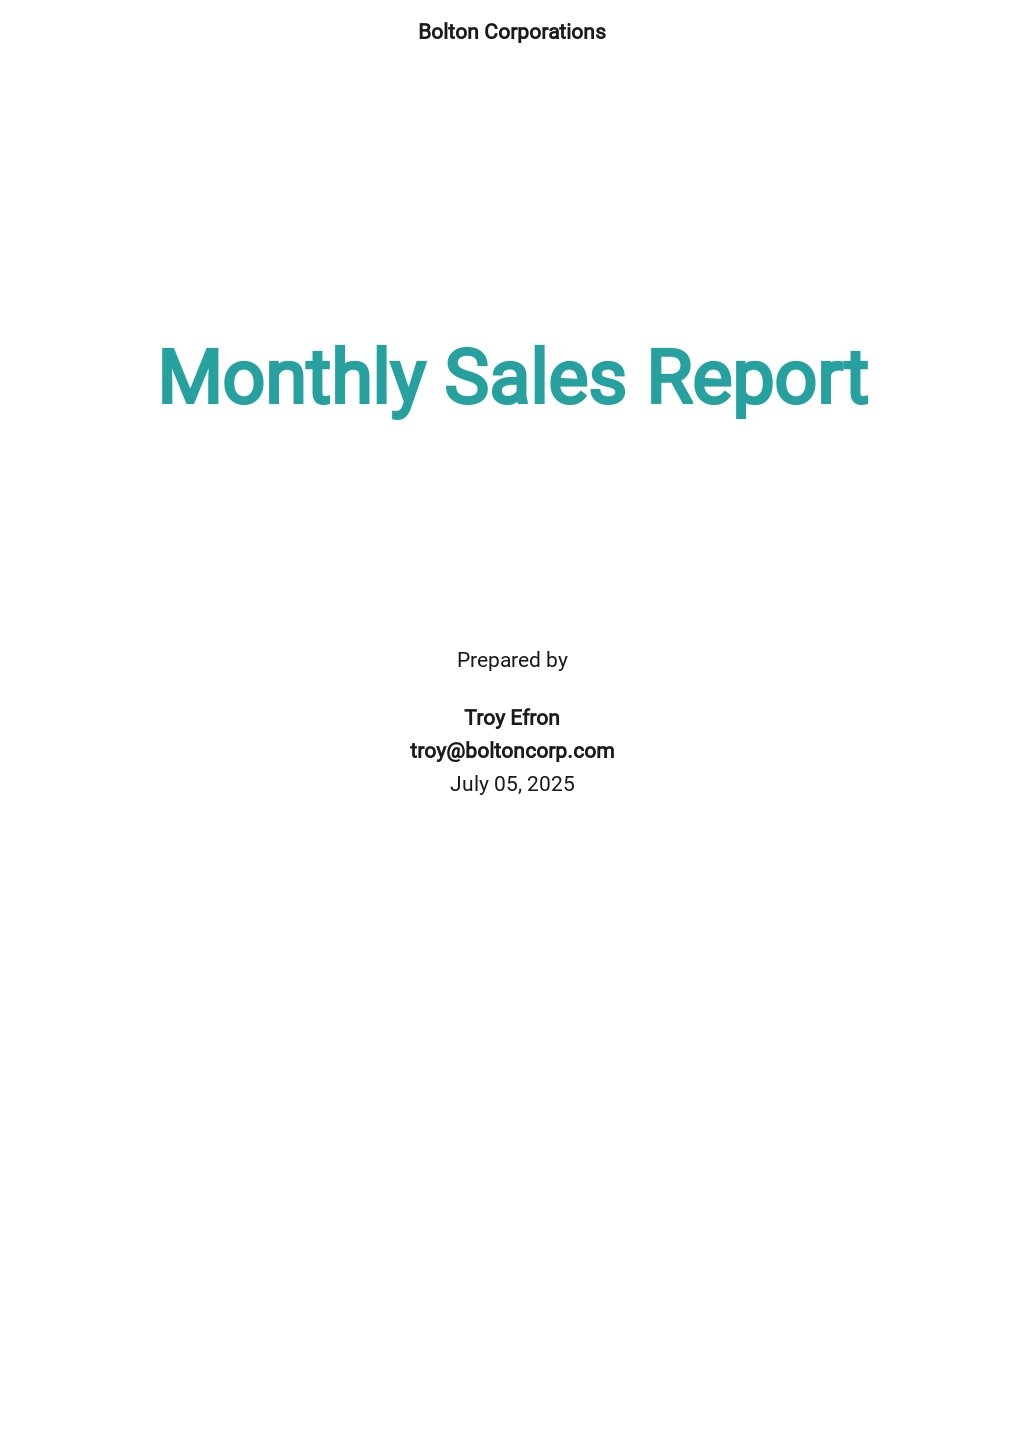 Monthly Sales Report Template.jpe